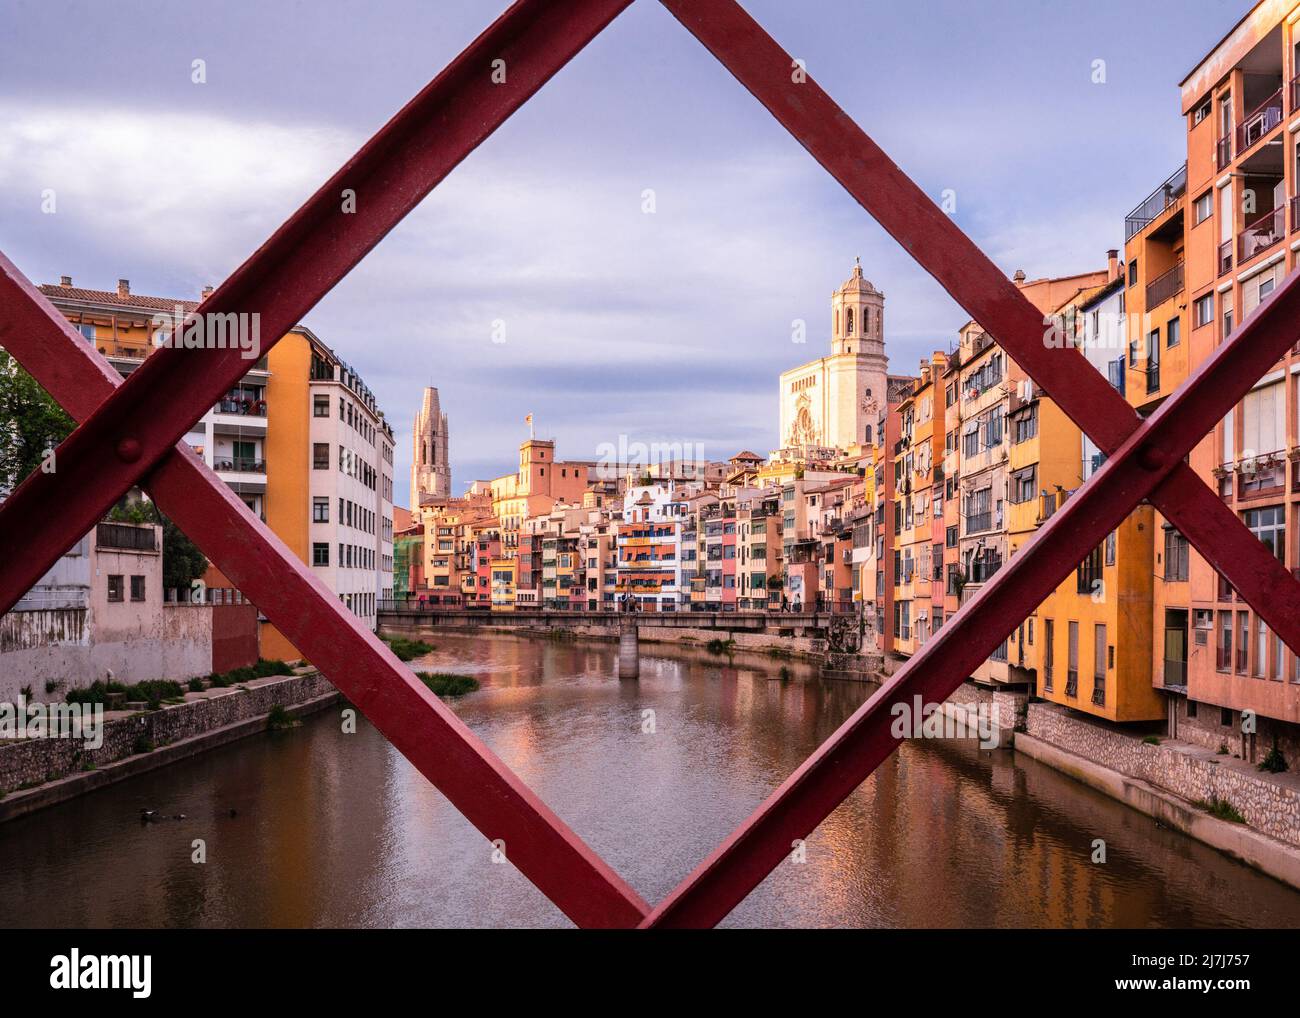 Beautiful Medieval city of Girona Spain seen through fence on canal Stock Photo